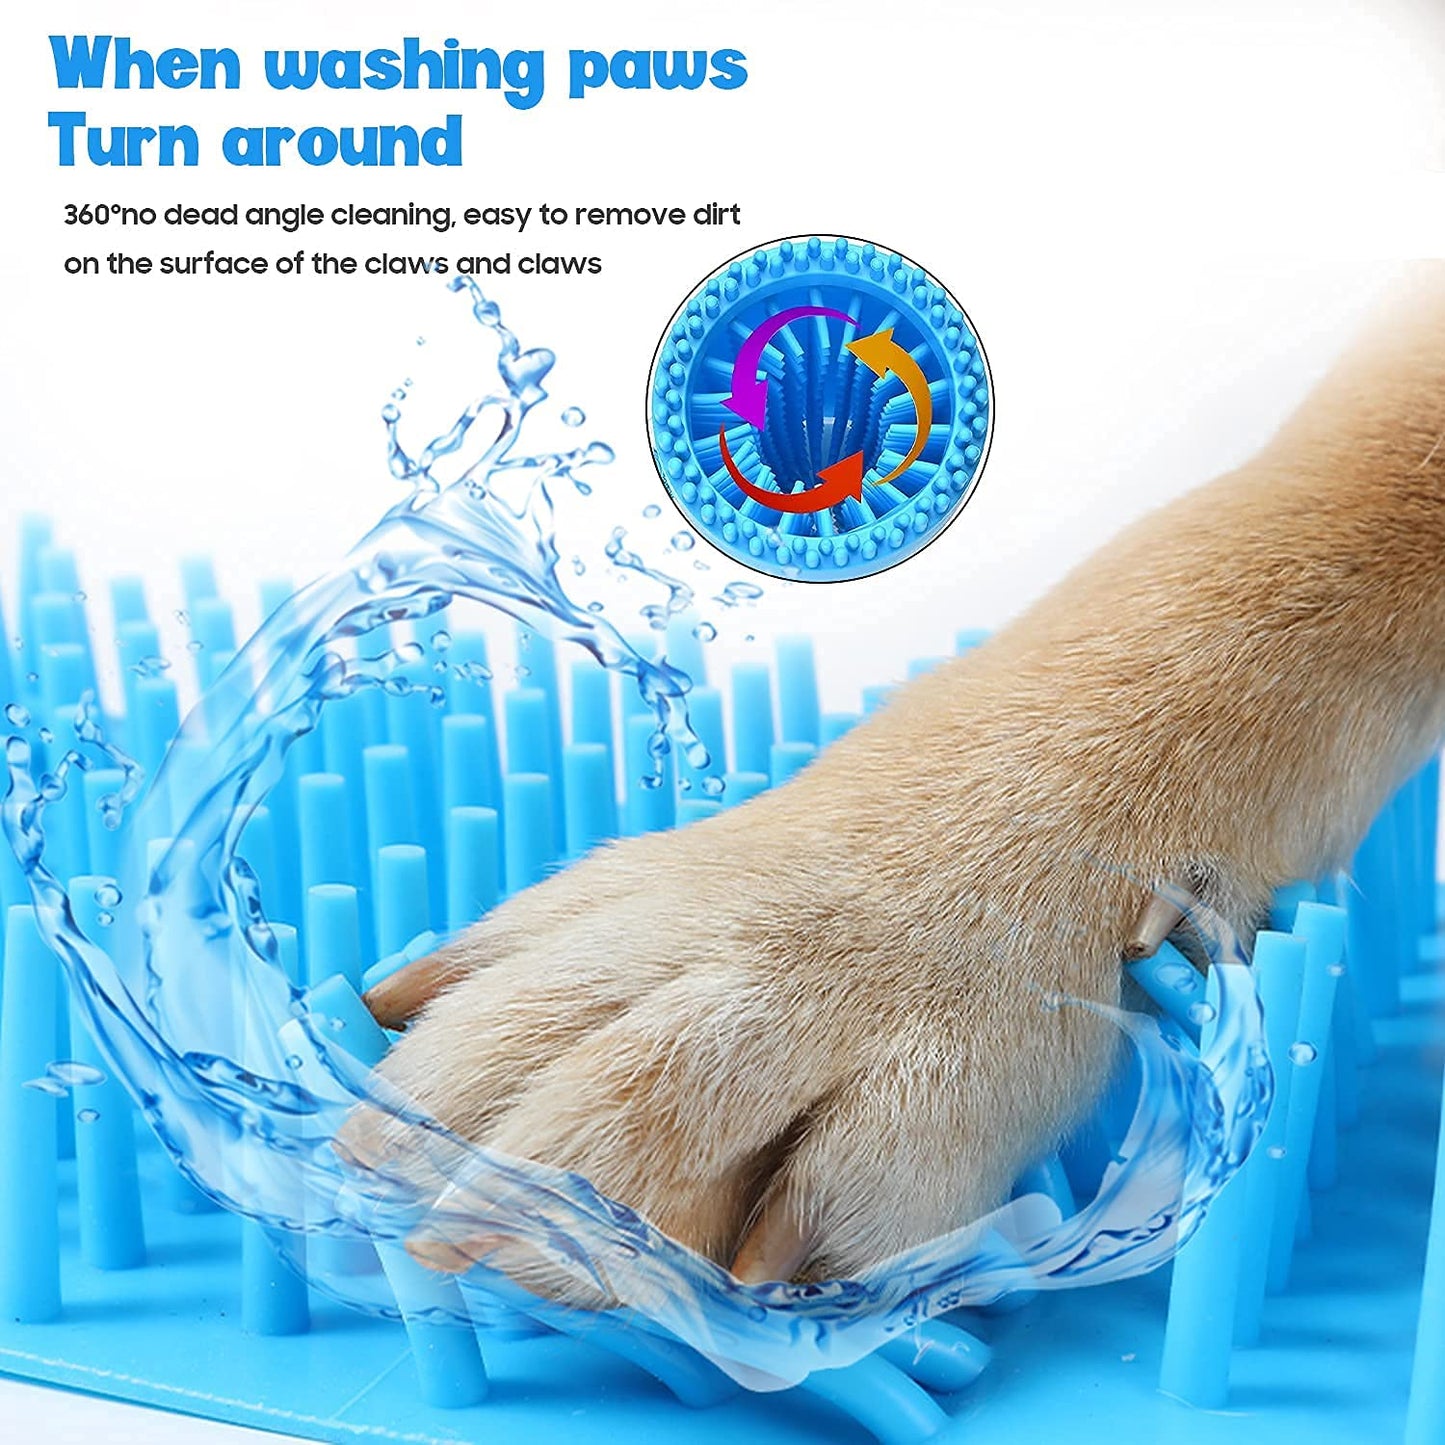 Dog Paw Cleaner, Portable Dog Foot Cleaner, Dog Scrubber for Bath, 2 in 1 Portable Silicone Pet Cleaning Brush Feet Cleaner for Dogs Grooming with Muddy Paw